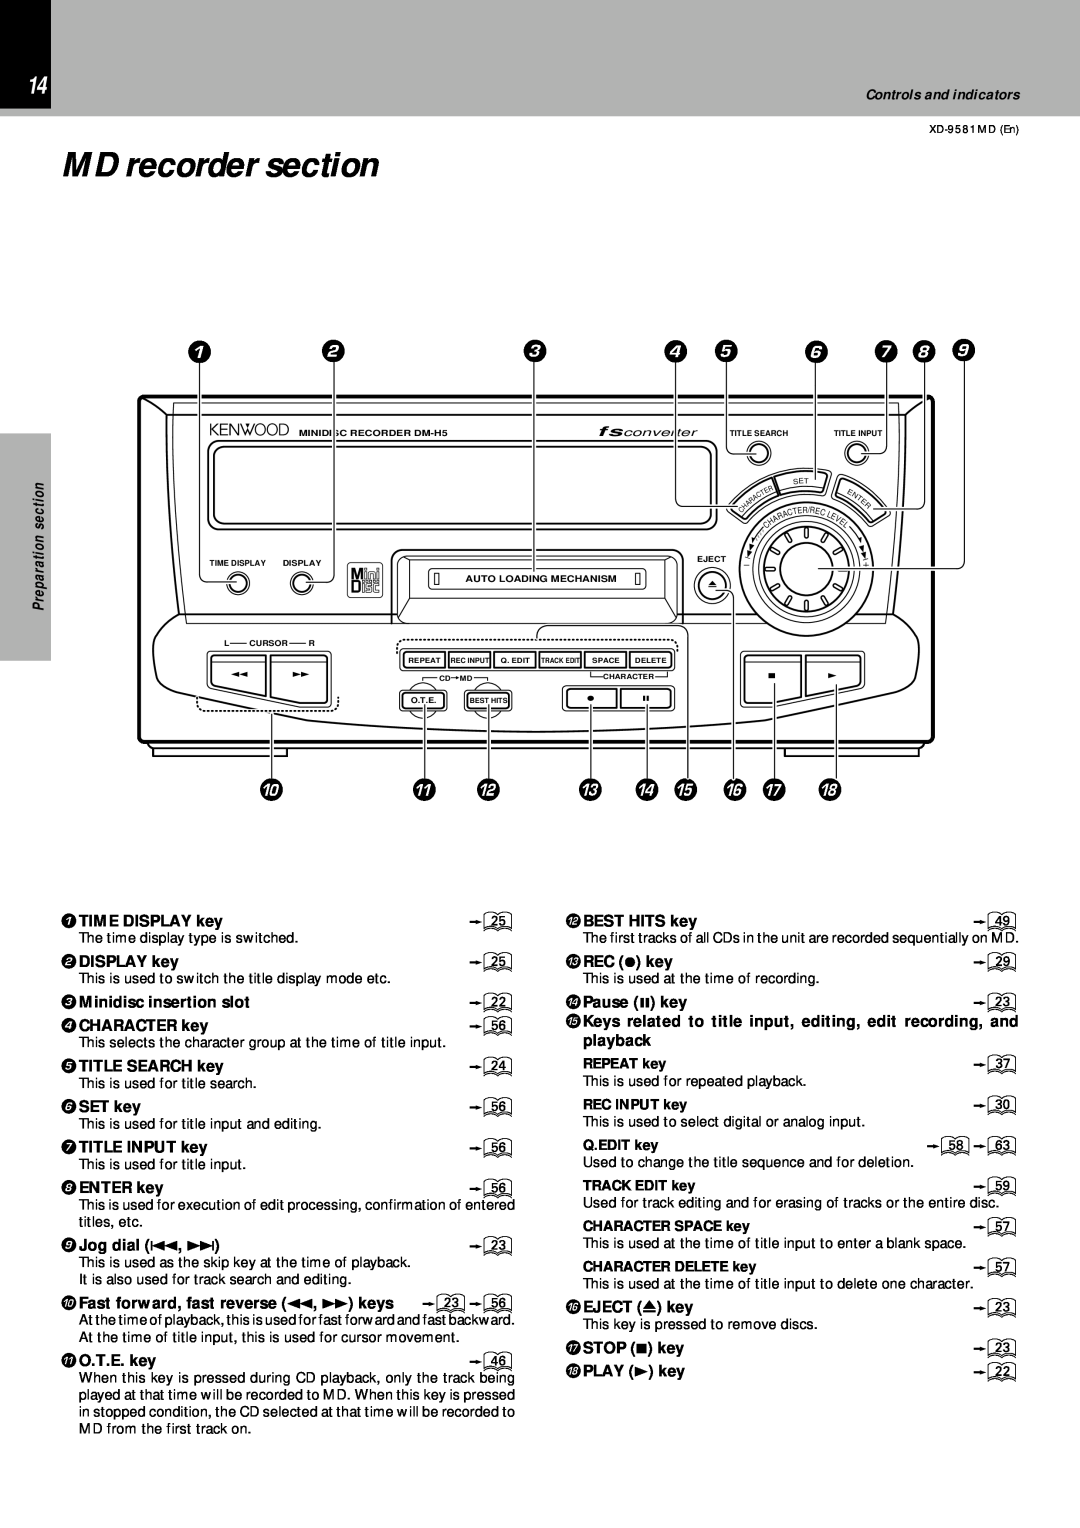 Kenwood XD-9581MD instruction manual MD recorder section 